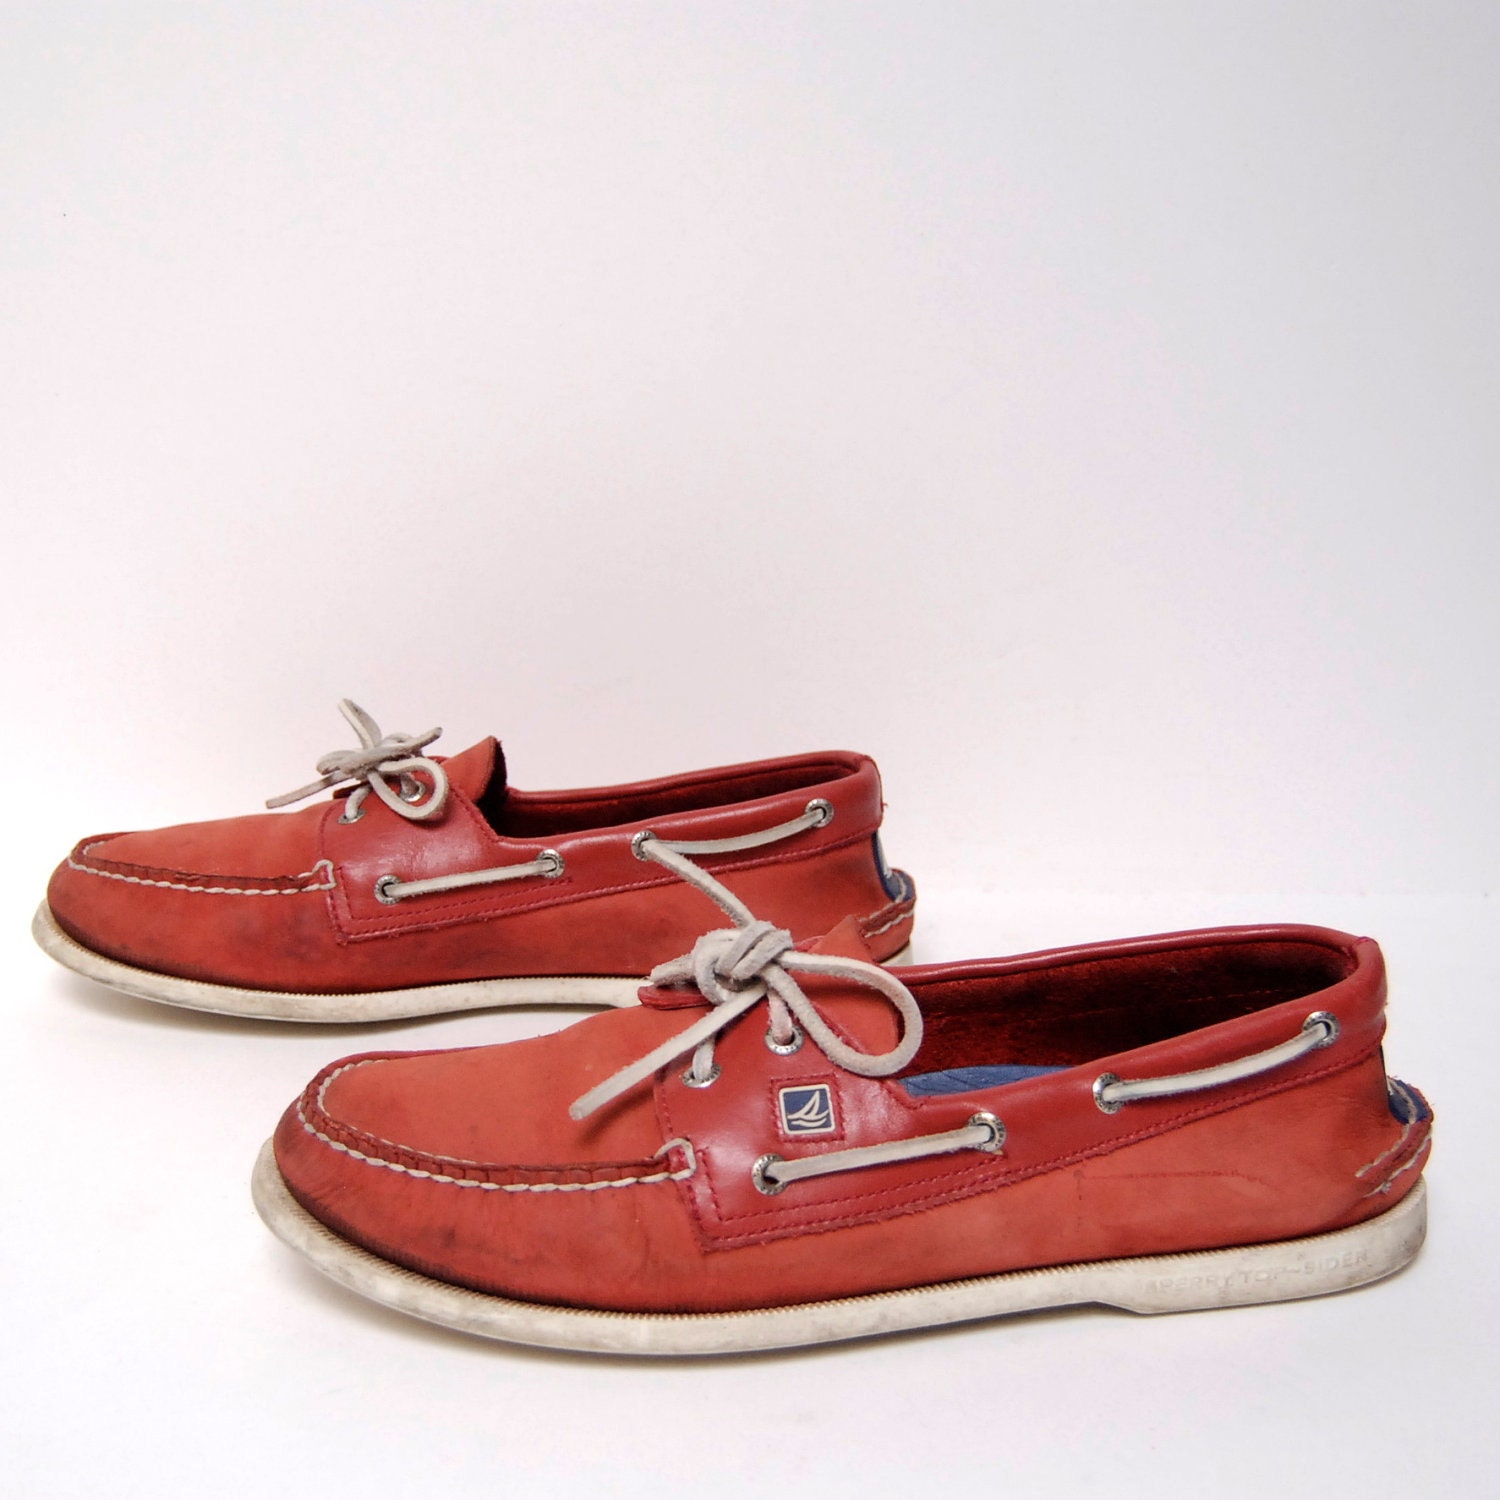 mens size 12 SPERRY top-sider RED LEATHER 80's boat shoe